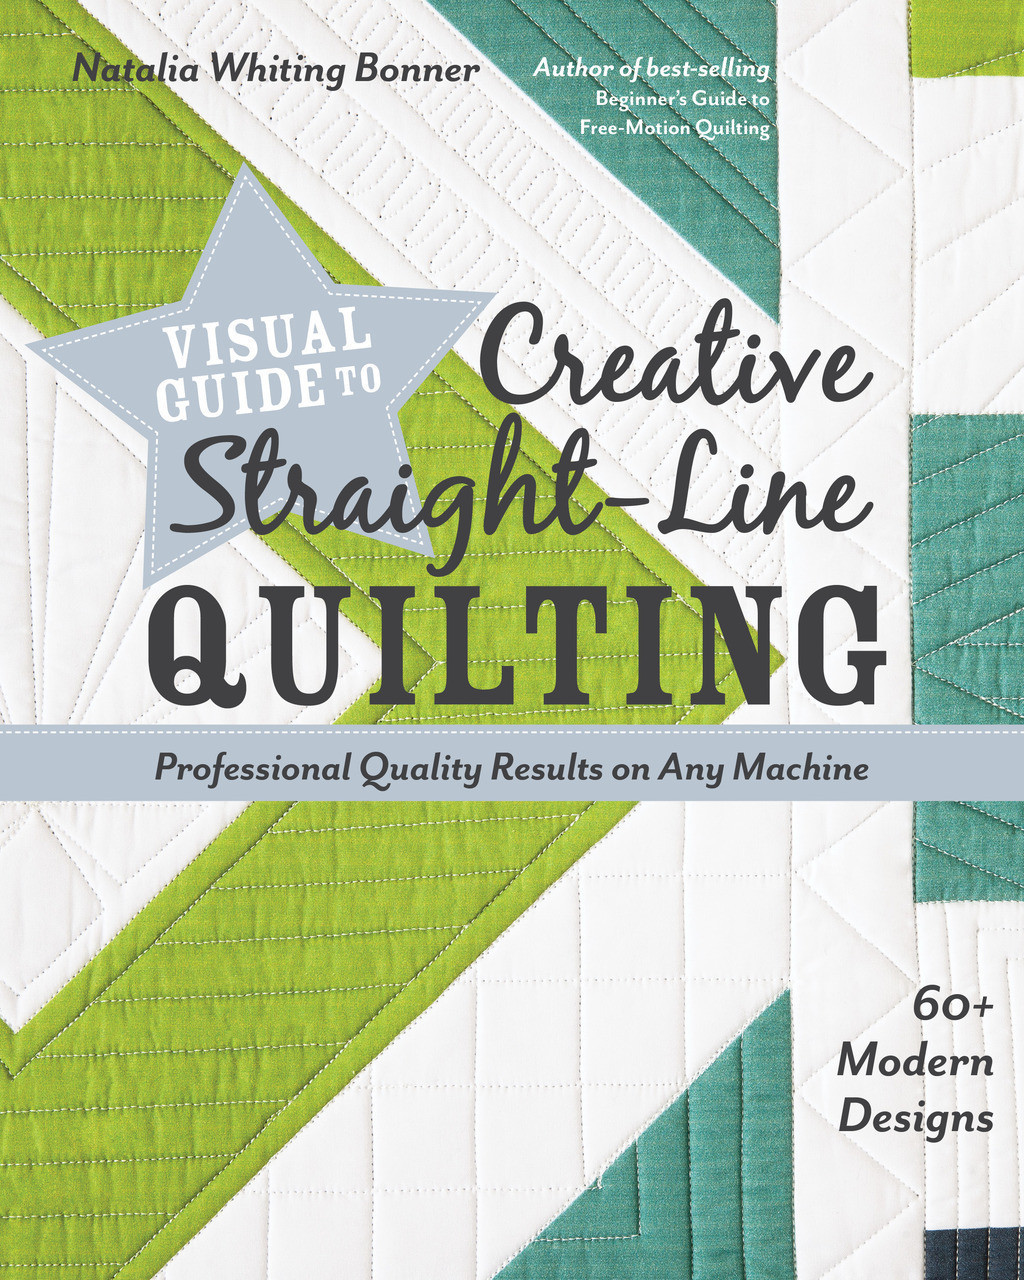 Five Tips to Make Free-Motion Quilting Easier - C&T Publishing